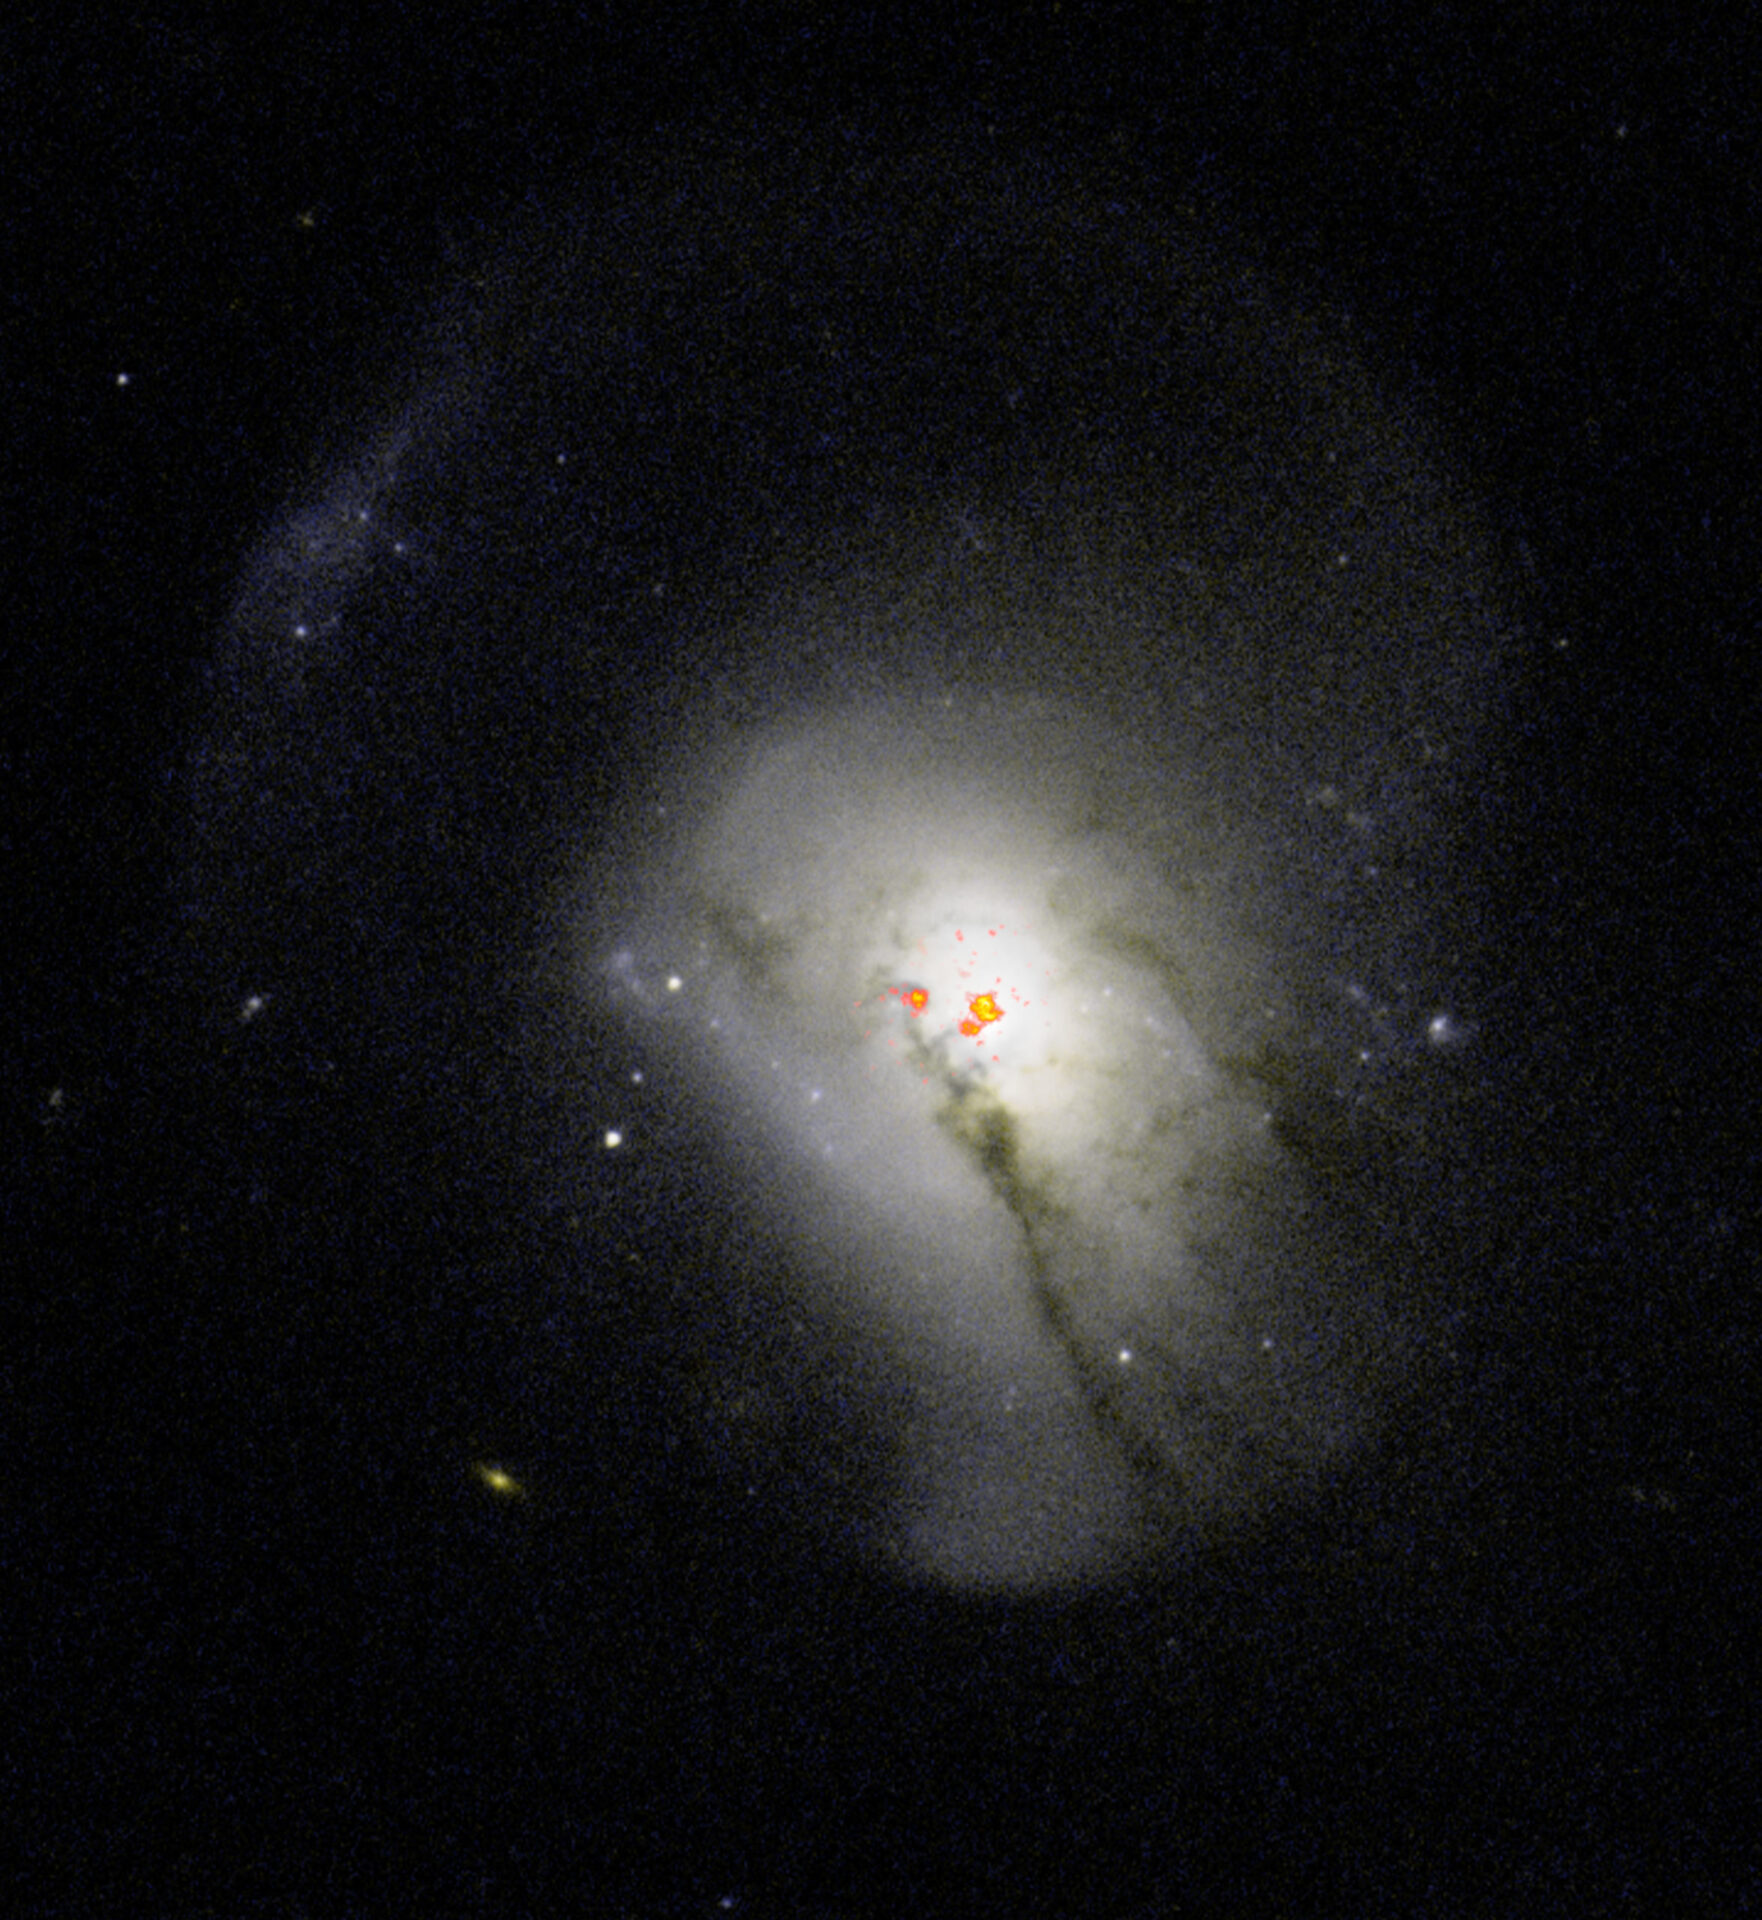 <p>Post-starburst galaxies were previously believed to expel all of their molecular gas, a behavior that caused them to stop forming stars. New observations have revealed that these galaxies actually hold onto and condense star-forming fuel near their centers and then don't use it to form stars. Here, radio data of PSB 0570.537.52266 overlaid on optical images from the Hubble Space Telescope show the dense collection of gas near the galaxy's center. Credit: ALMA (ESO/NAOJ/NRAO) / S. Dagnello (NRAO/AUI/NSF)</p>
